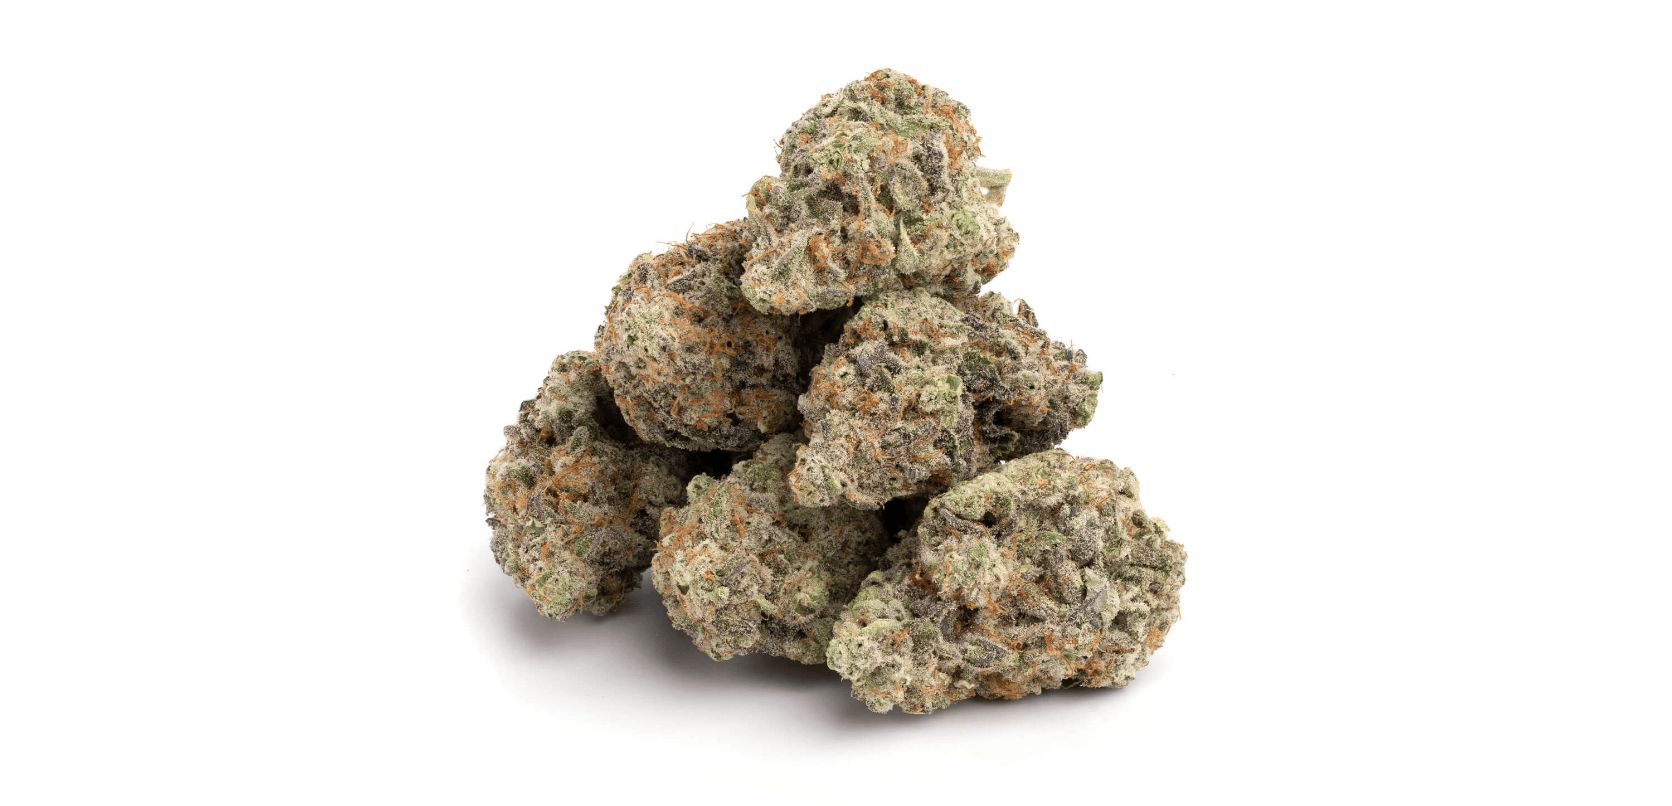 To conclude this Mac 10 strain review, know that West Coast Cannabis is more than just an online dispensary in Canada; it’s your sidekick in bringing your cannabis journey to the next level.